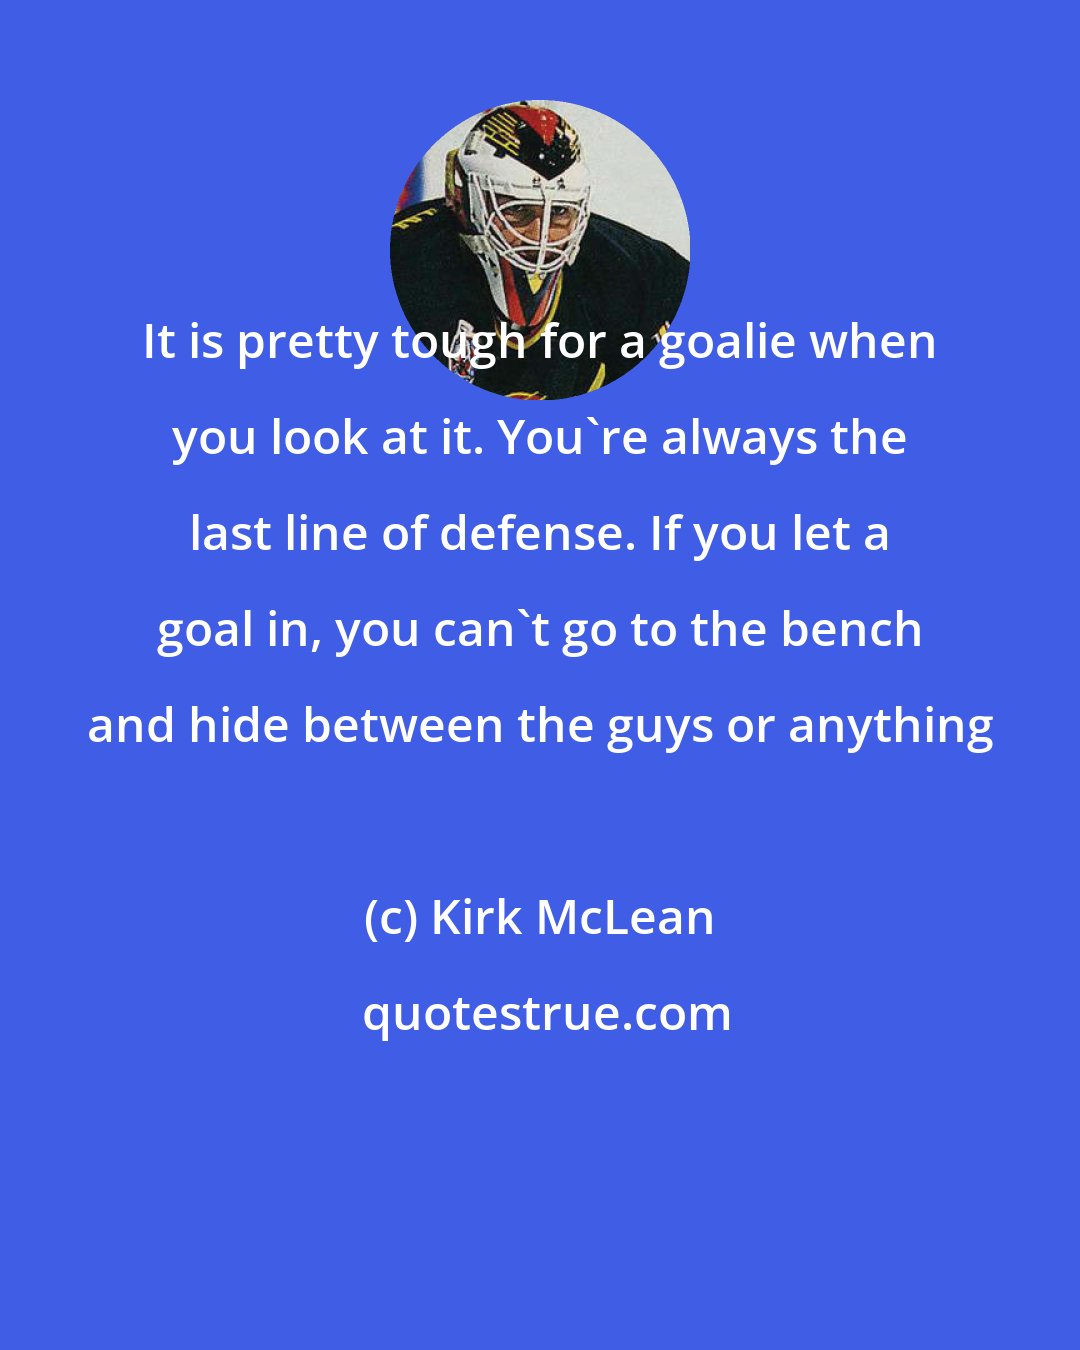 Kirk McLean: It is pretty tough for a goalie when you look at it. You're always the last line of defense. If you let a goal in, you can't go to the bench and hide between the guys or anything